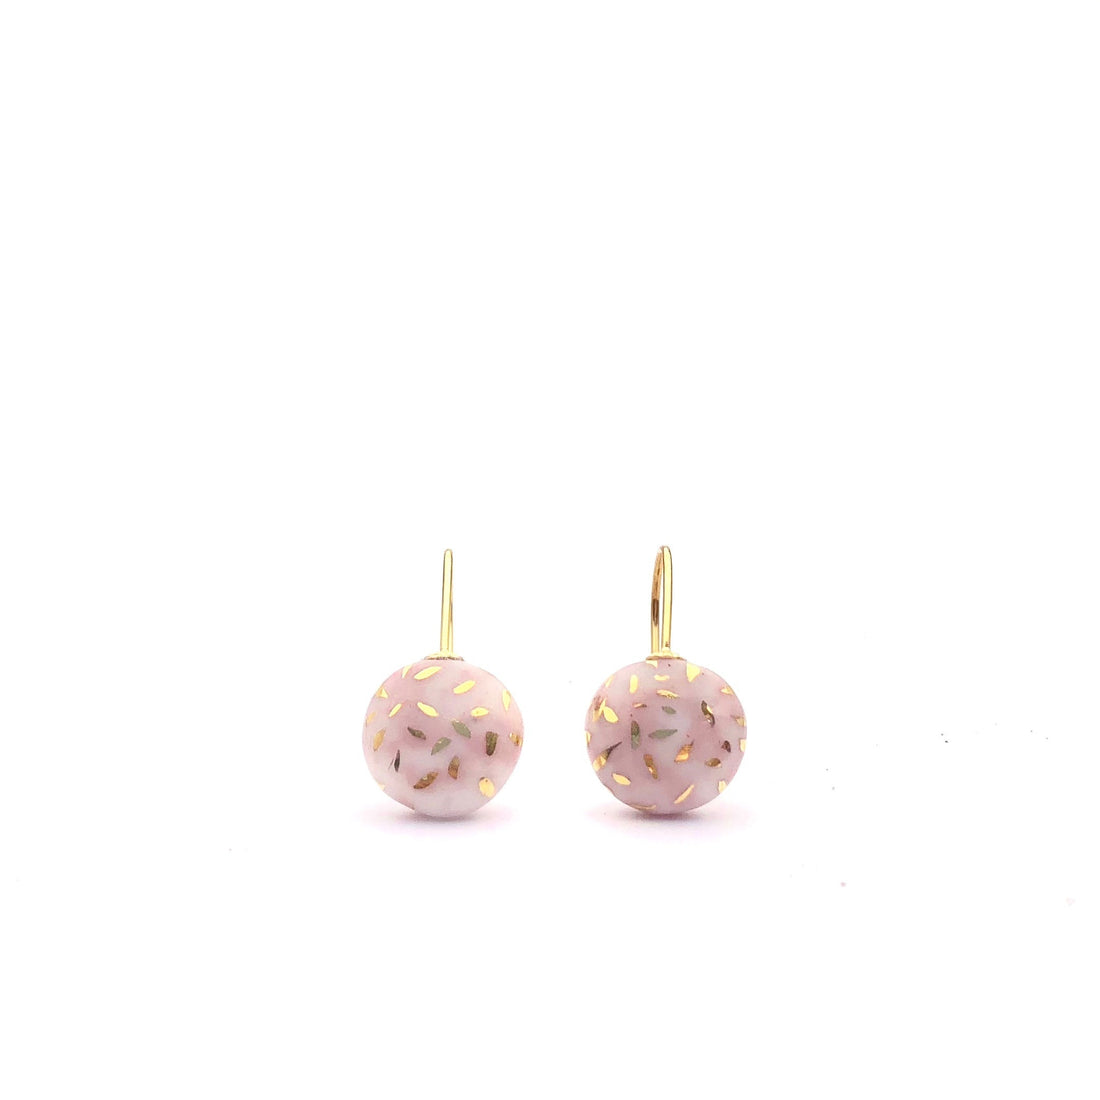 Soft Pink porcelain earrings with gold